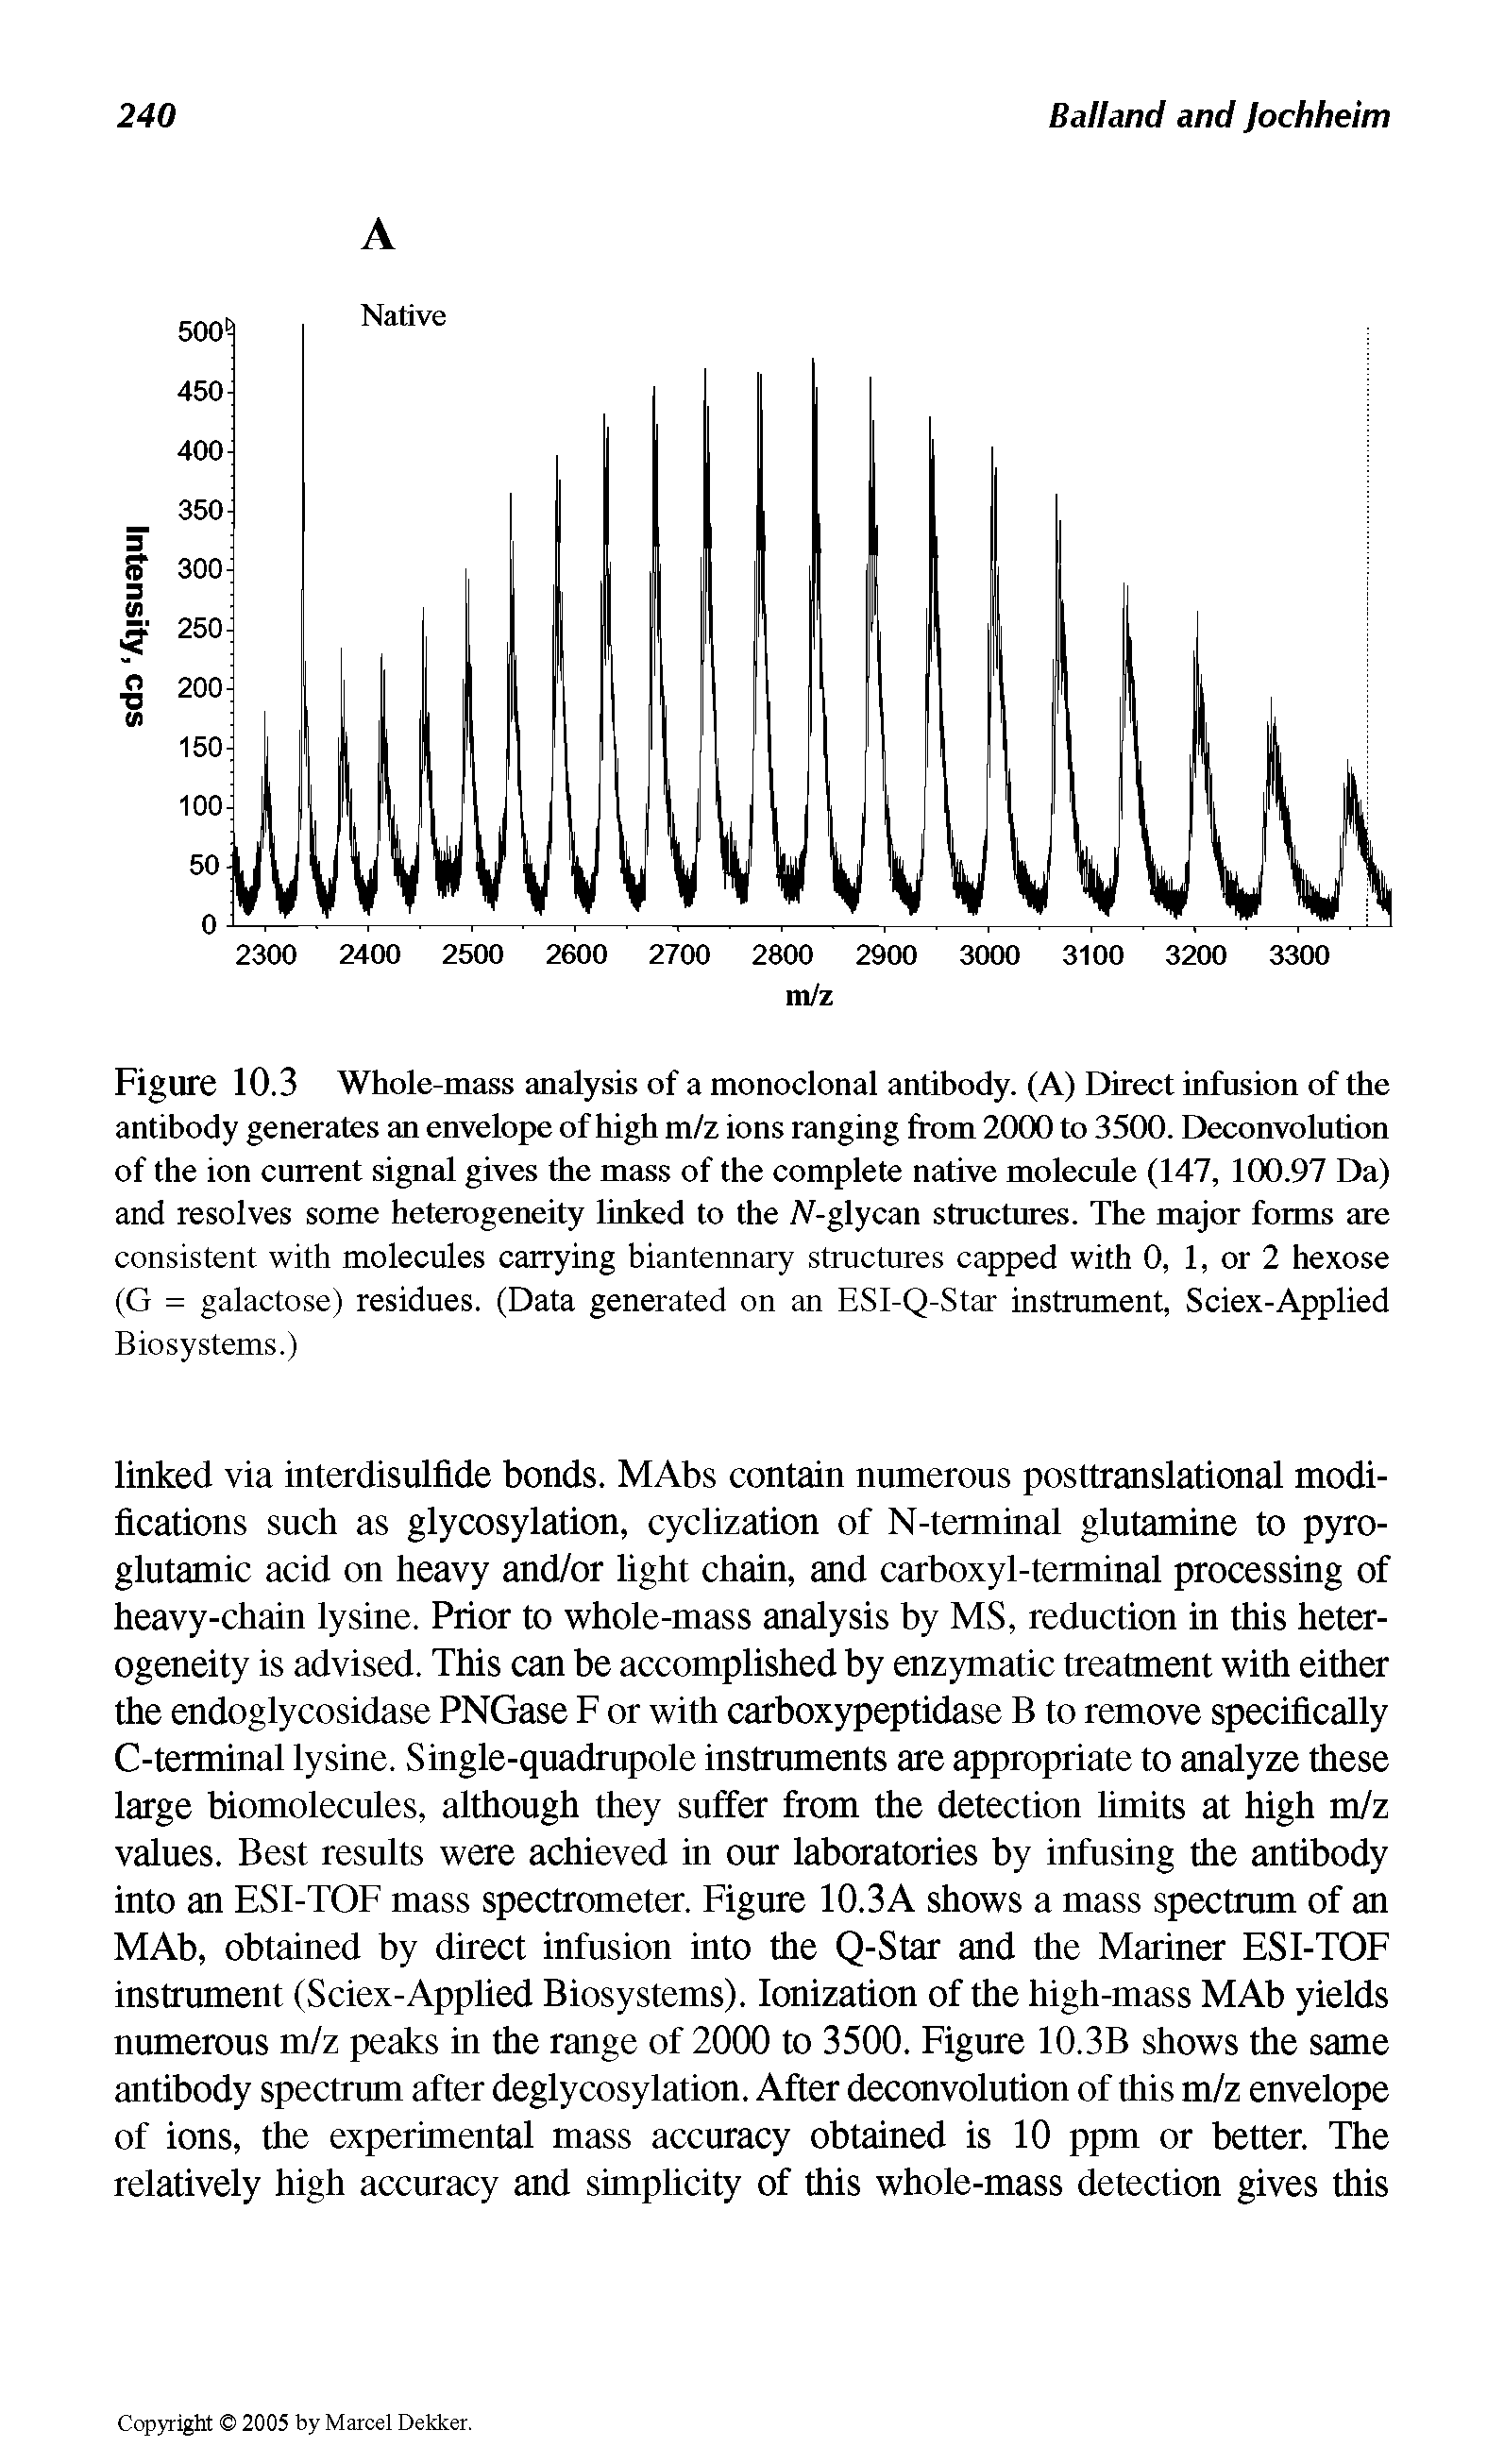 Figure 10.3 Whole-mass analysis of a monoclonal antibody. (A) Direct infusion of the antibody generates an envelope of high m/z ions ranging from 2000 to 3500. Deconvolution of the ion current signal gives the mass of the complete native molecule (147, 100.97 Da) and resolves some heterogeneity linked to the A-glycan structures. The major forms are consistent with molecules carrying biantennary structures capped with 0, 1, or 2 hexose (G = galactose) residues. (Data generated on an ESI-Q-Star instrument, Sciex-Applied Biosystems.)...